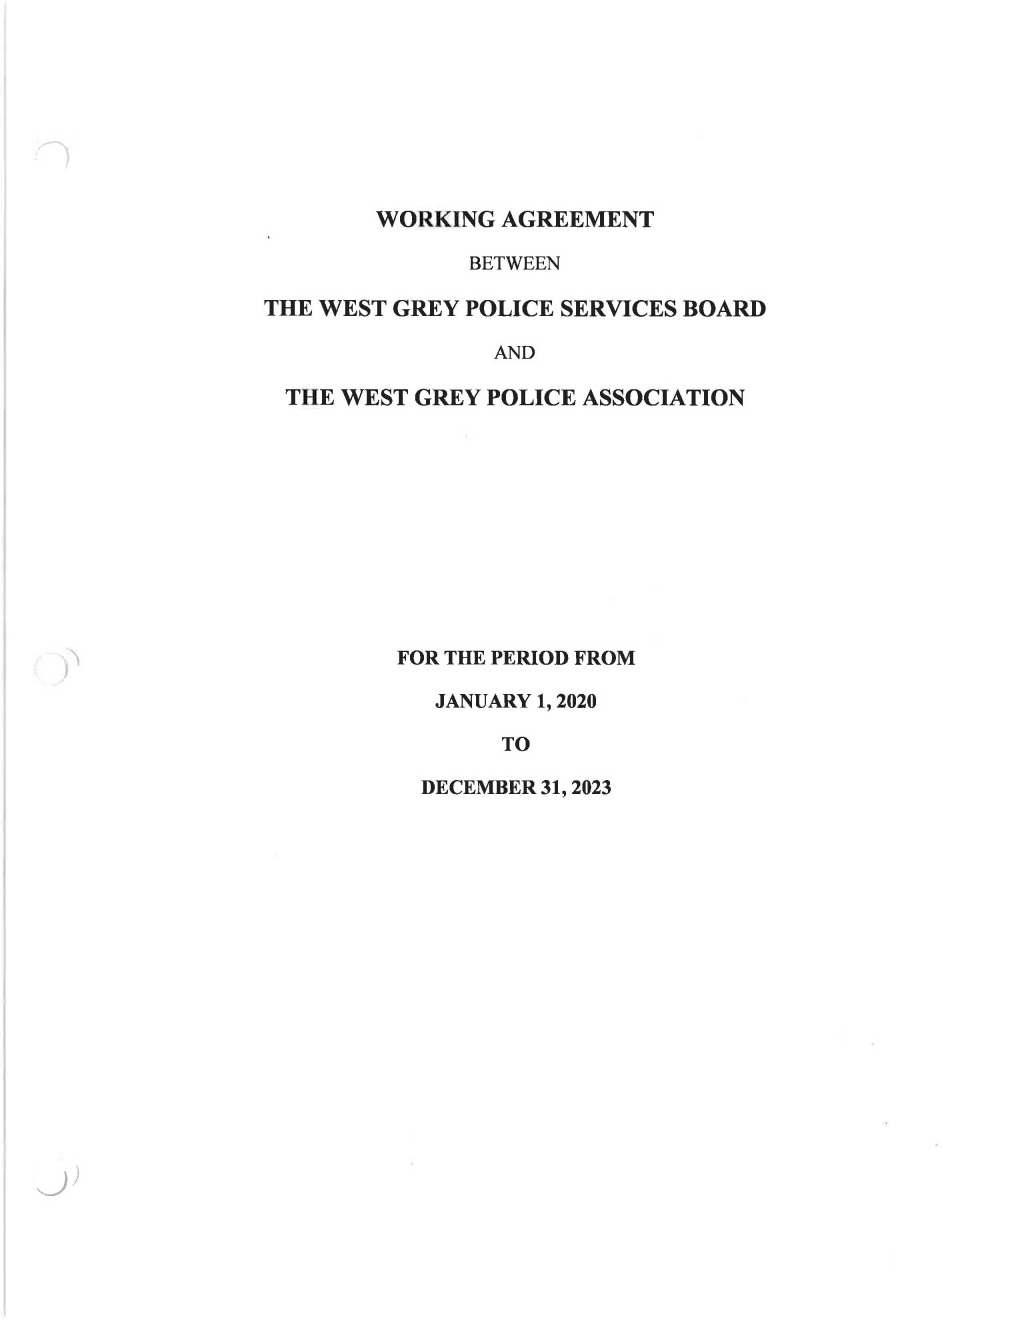 Working Agreement the West Grey Police Services Board